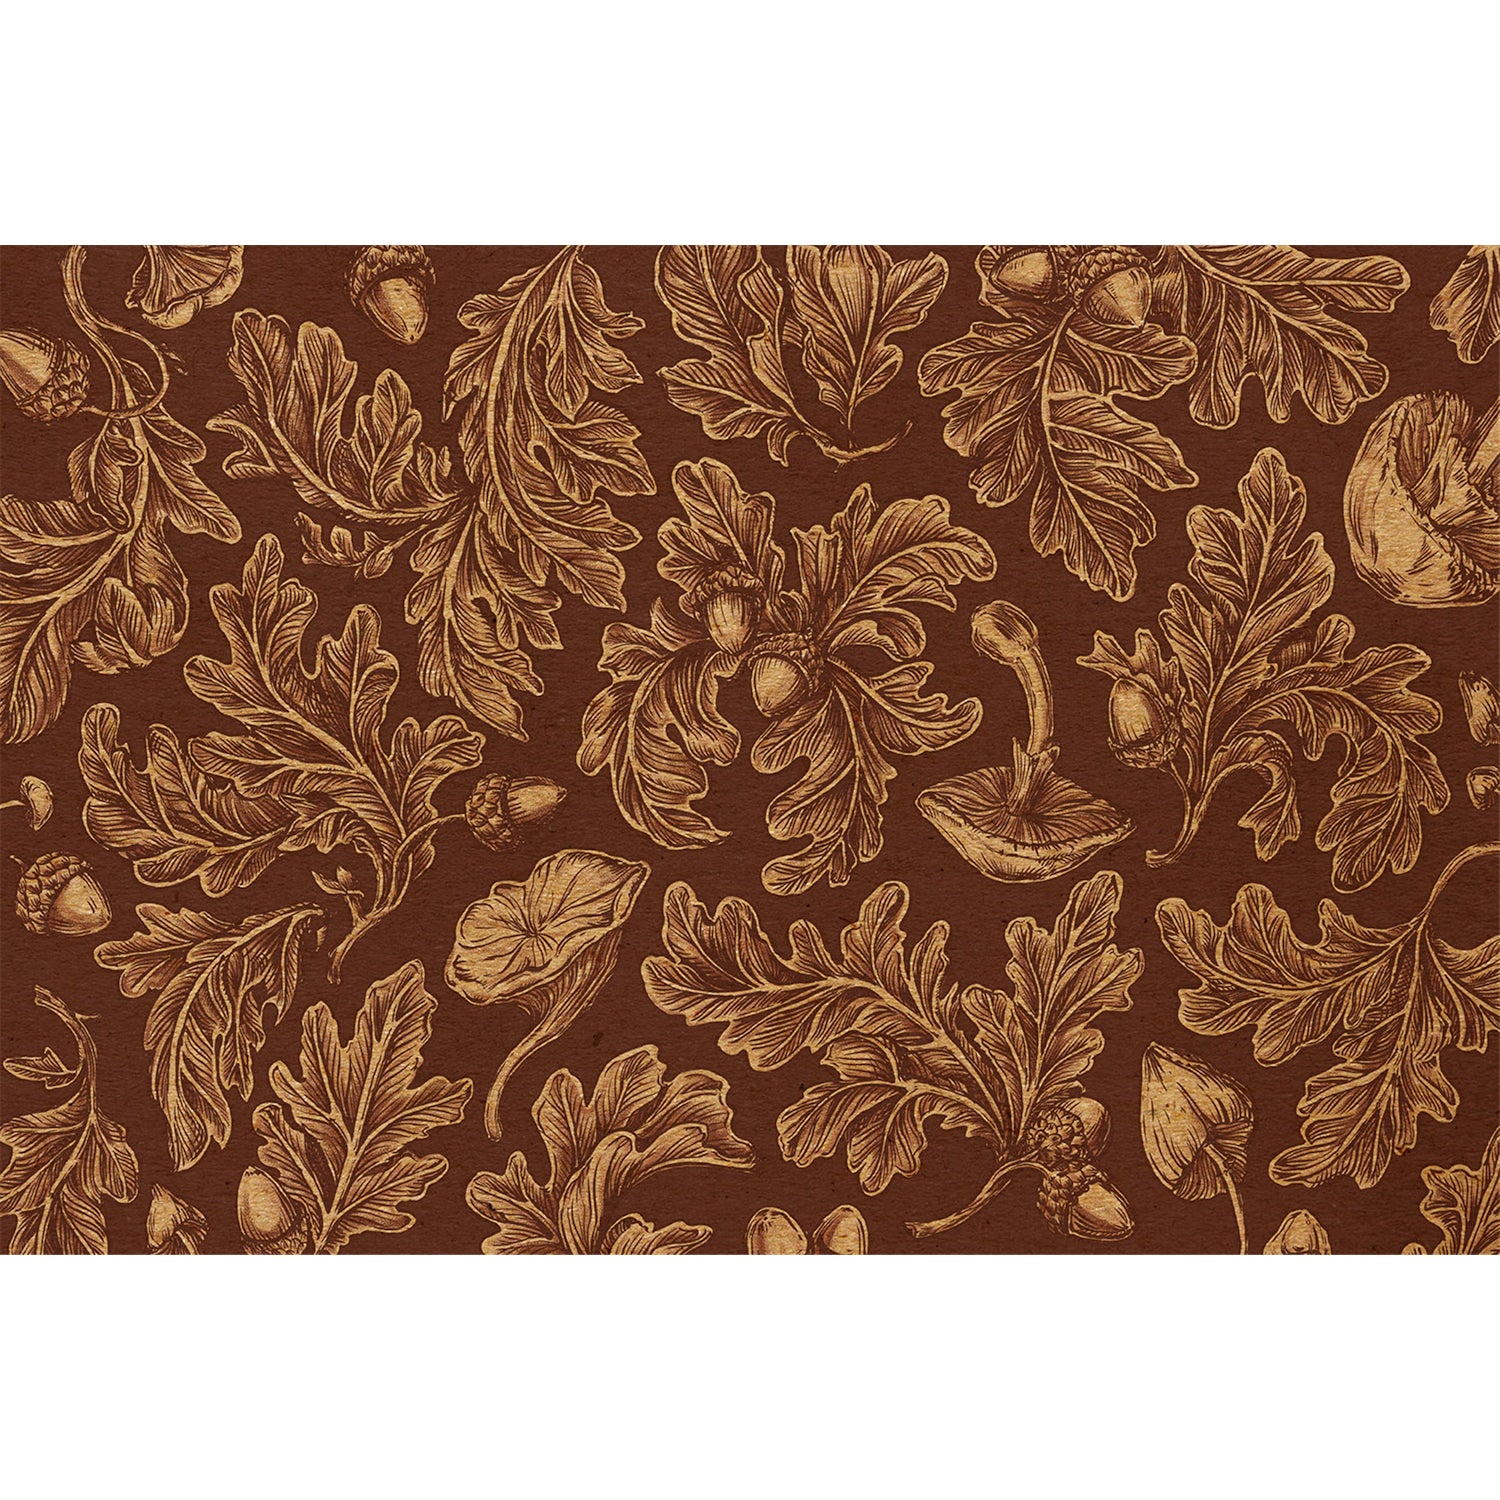 An engraving-style illustrated pattern of kraft-tan oak leaves, acorns and mushrooms scattered on a deep brown background. 